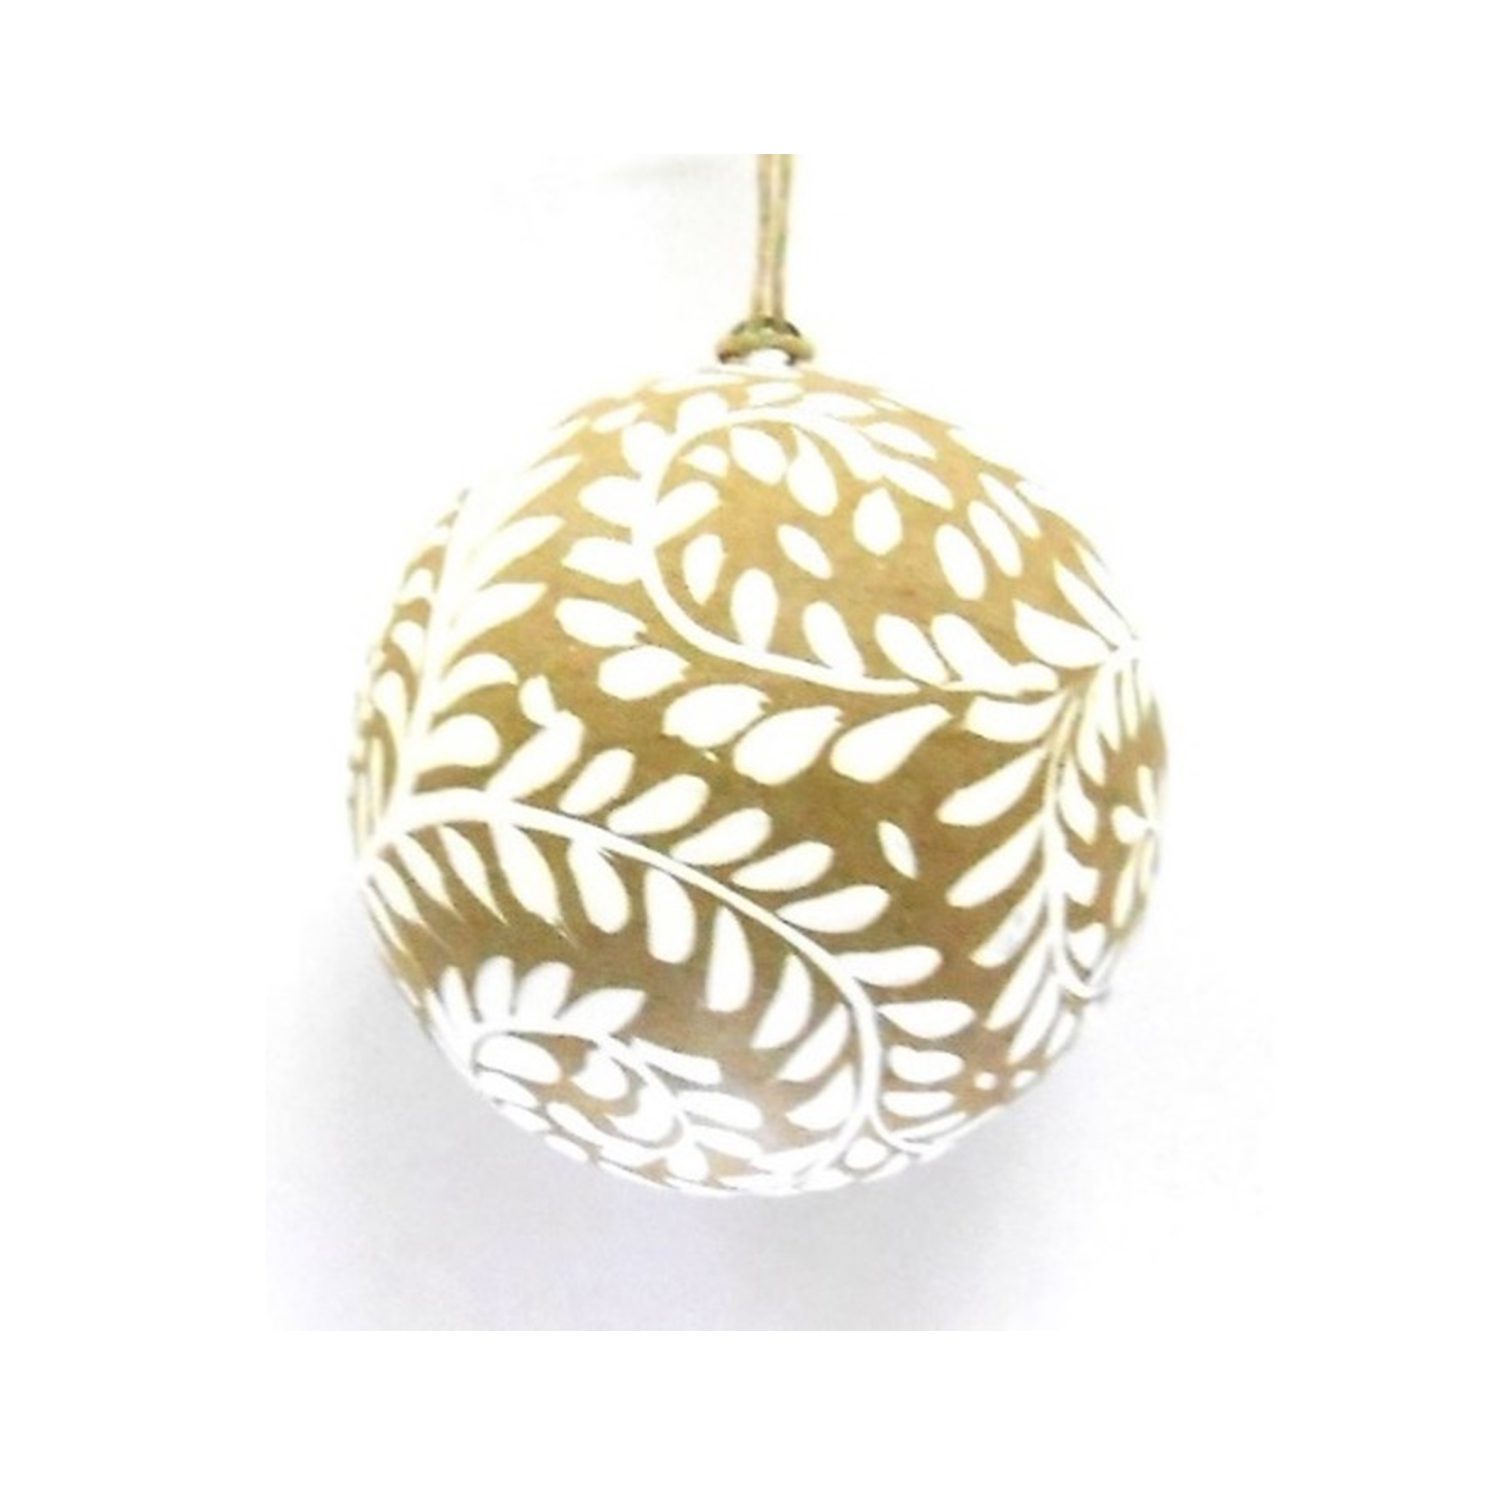 Foliate Christmas Tree Decoration,Gold and White